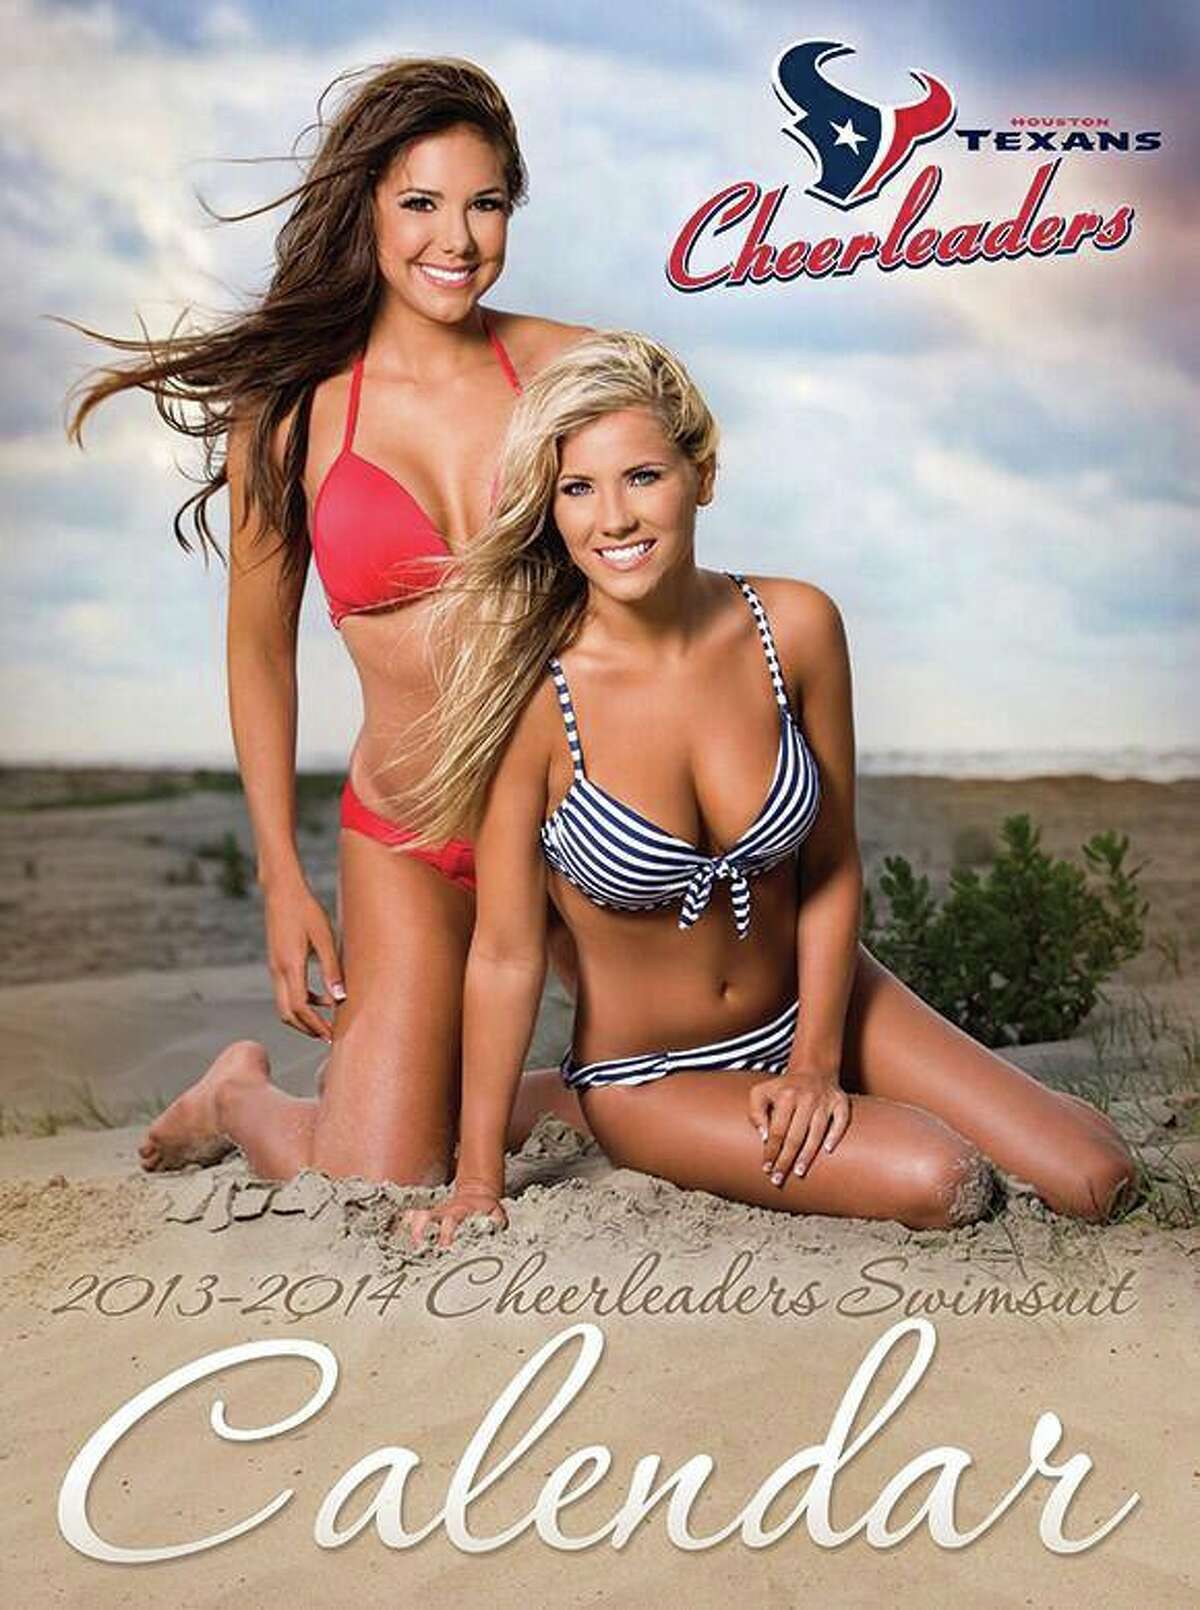 The HoustonT exans Cheerleaders have revealed the cover image for their 2013-14 Swimsuit Calendar. The calendar will be on sale starting Saturday, July 27 at the Coors Light display in Houston-area Kroger locations, the Go Texan Store at Reliant Stadium, and online at shop.HoustonTexans.com.